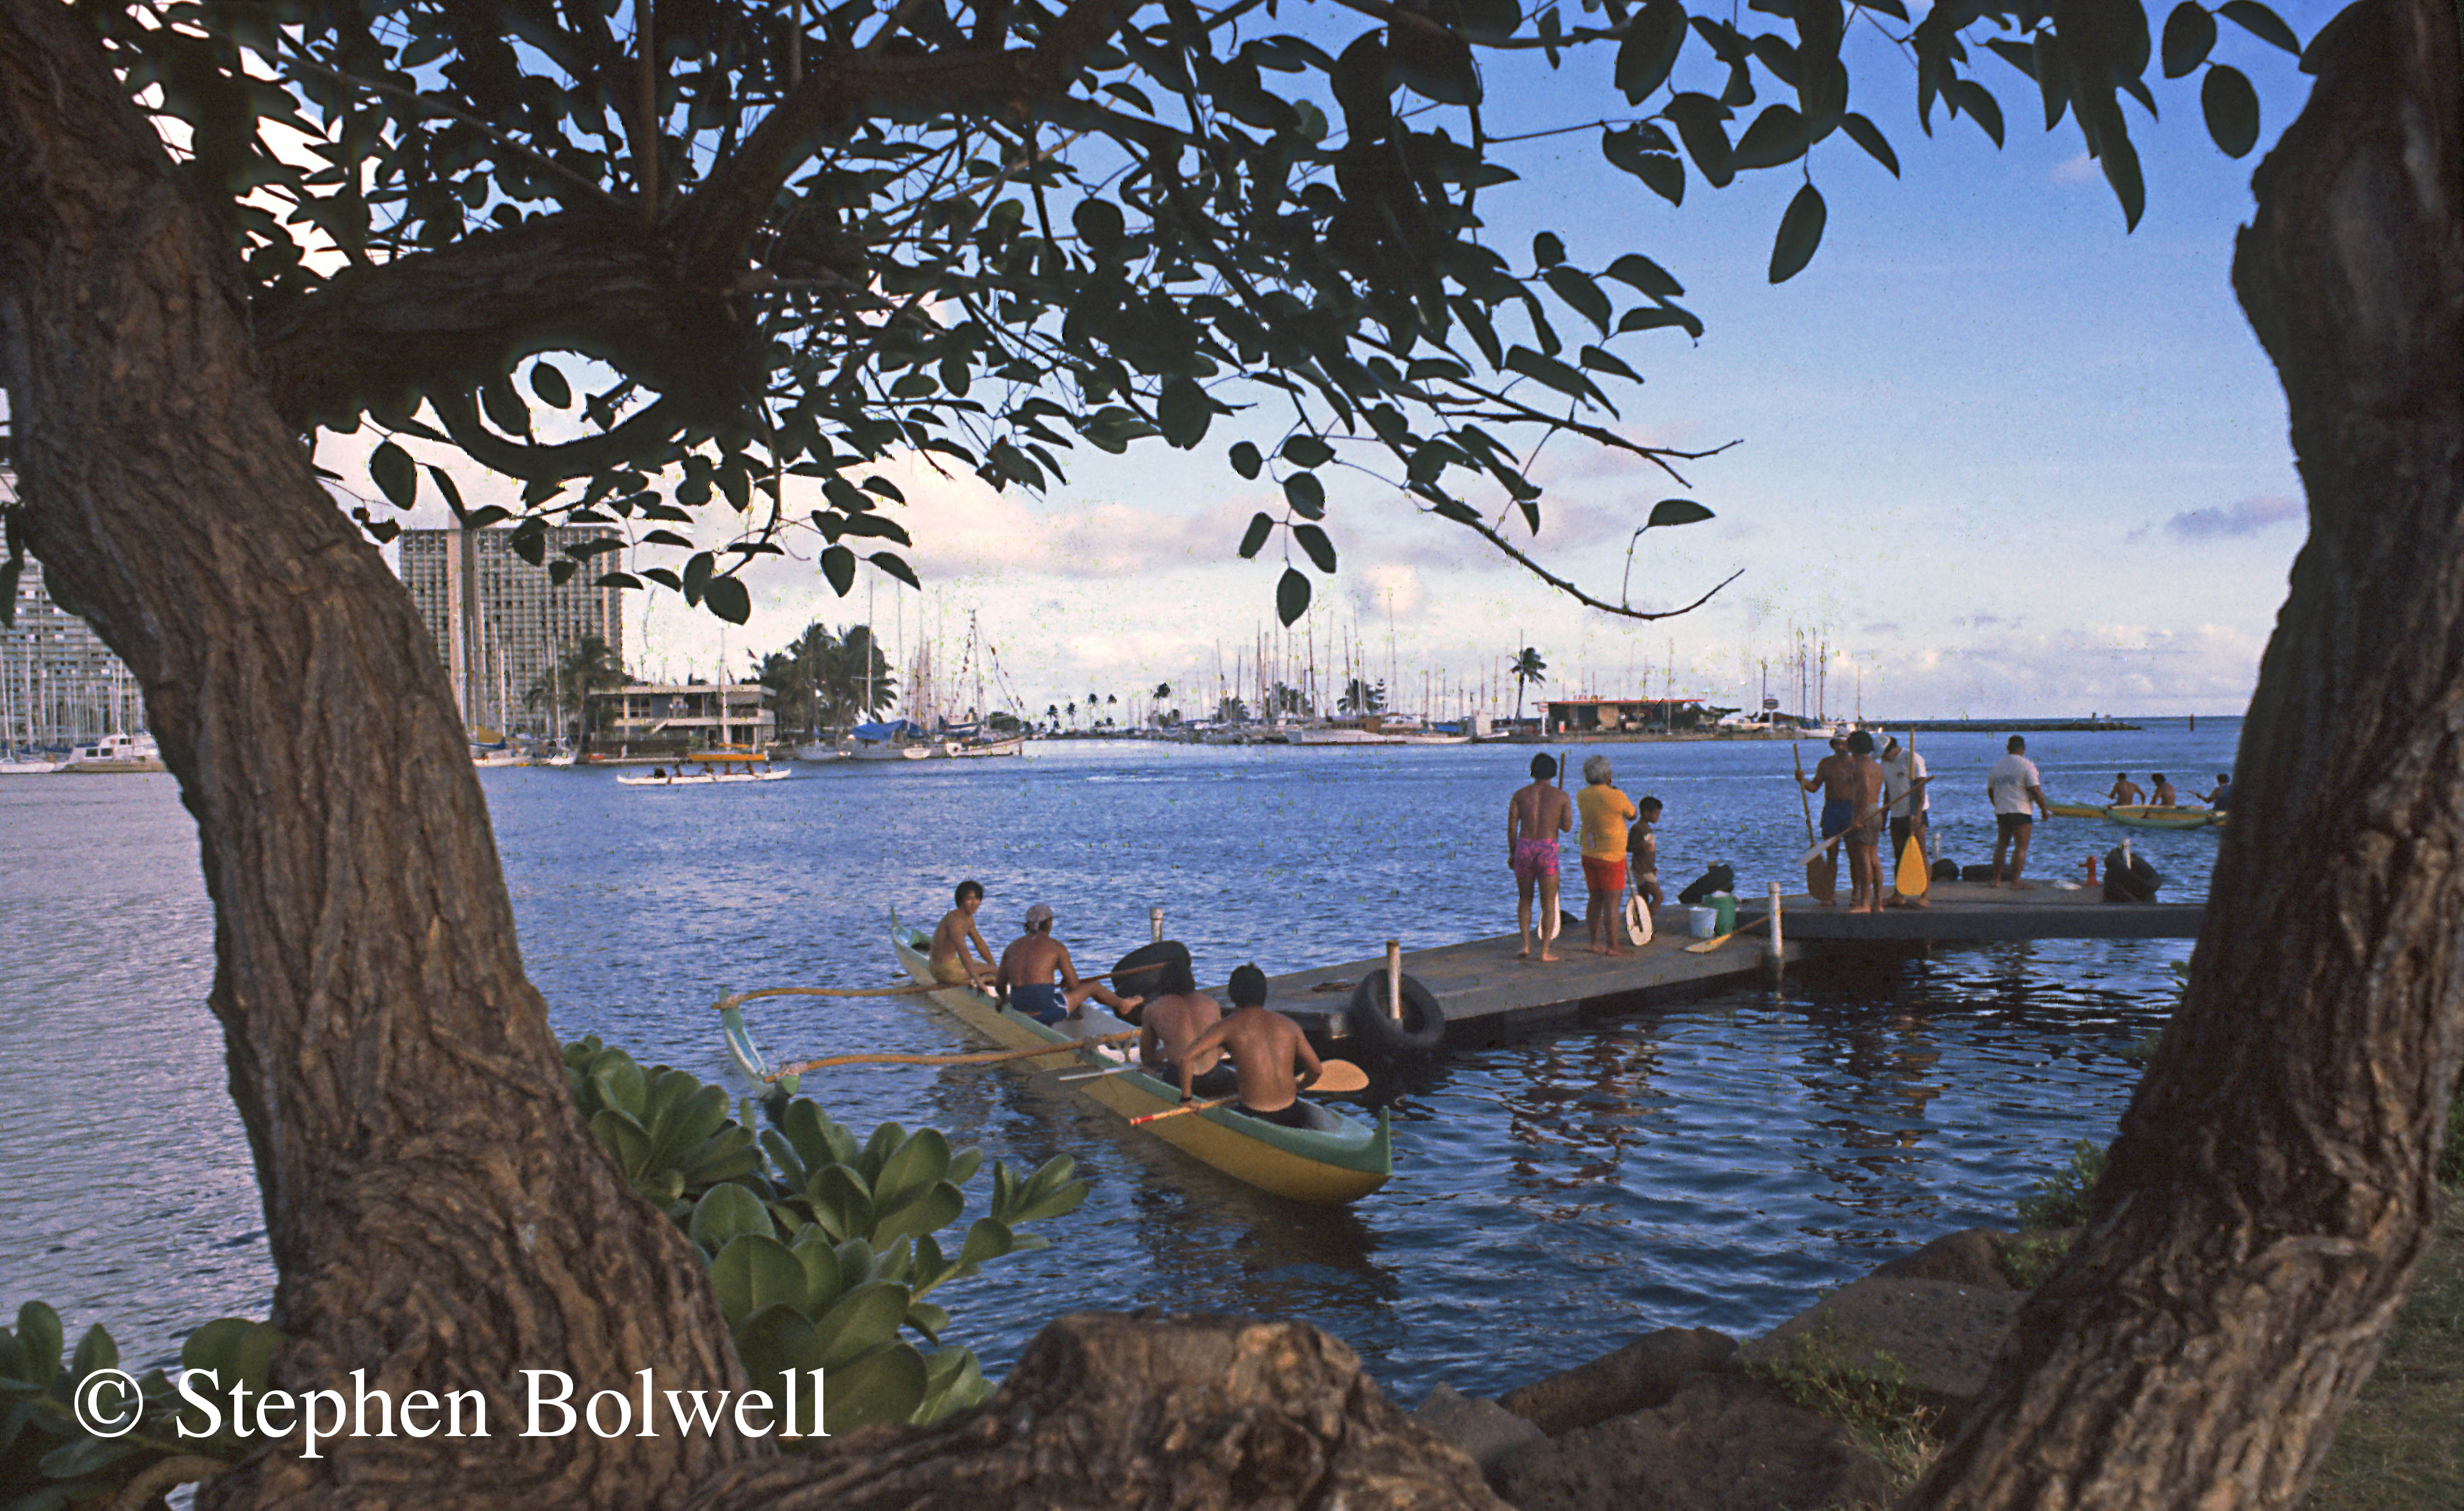 In Honolulu locals race canoes that have changed very little since Captain Cook's arrival on the Islands two hundred and one years before this picture was taken.